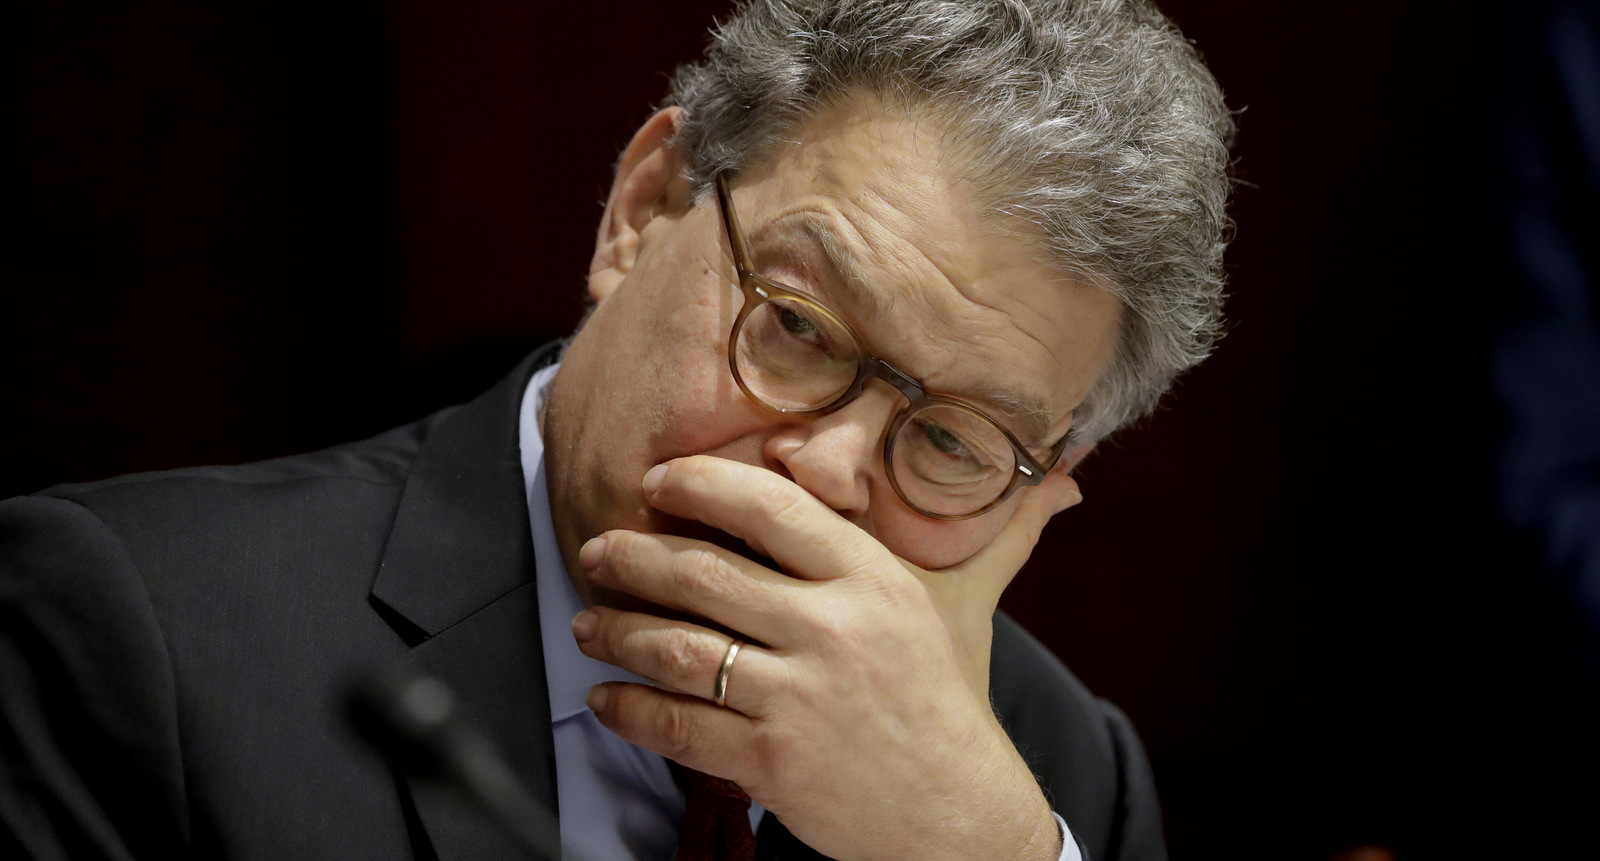 Sen. Al Franken, D-Minn., listens at a committee hearing at the Capitol in Washington. A second woman has accused Minnesota Sen. Al Franken of inappropriate touching, saying on Nov. 20, 2017 that he put his hand on her bottom as they posed for a picture at the Minnesota State Fair in 2010, after he had begun his career in the Senate. Menz's allegation comes days after a Los Angeles broadcaster, Leeann Tweeden, accused Franken of forcibly kissing her during a 2006 USO tour. (AP/J. Scott Applewhite)